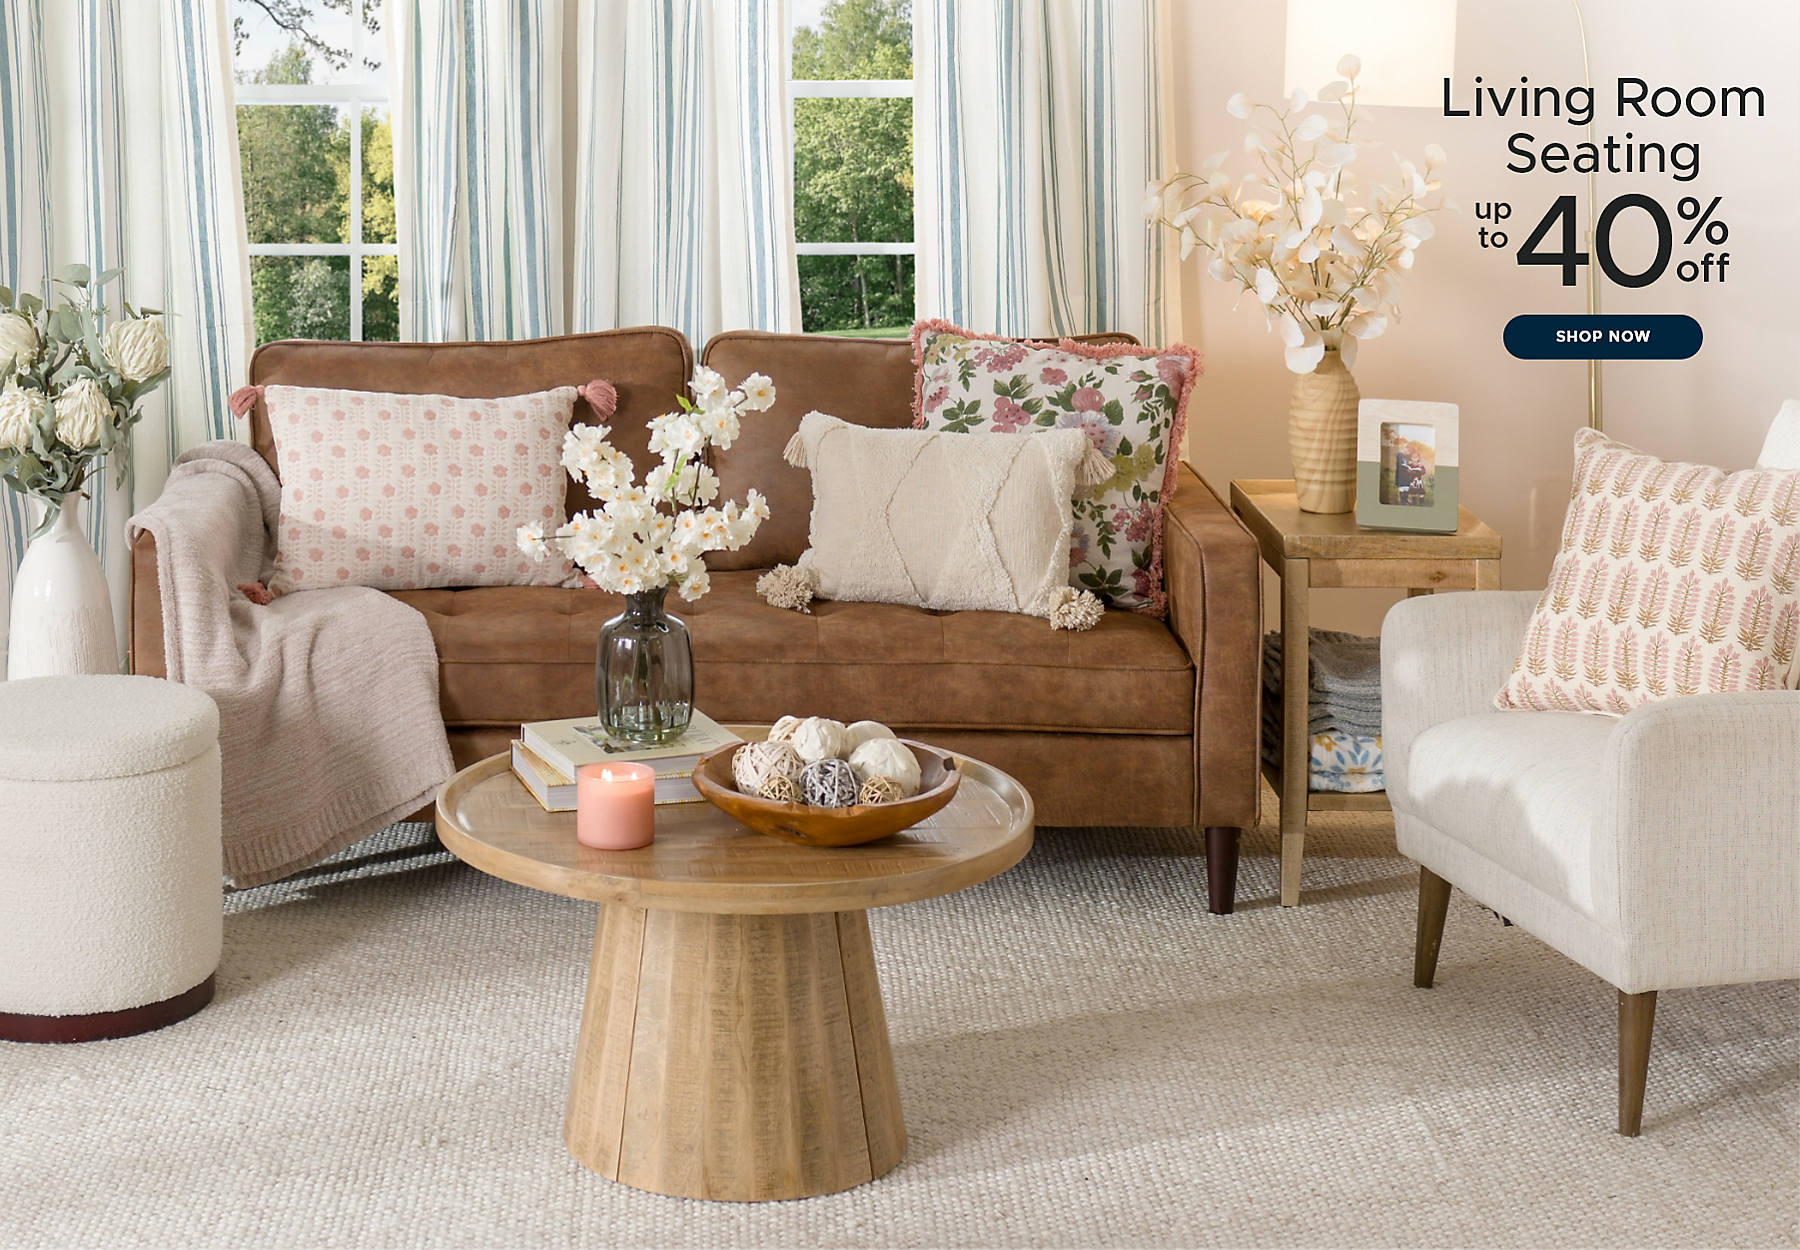 Living Room Furniture up to 40% off shop now